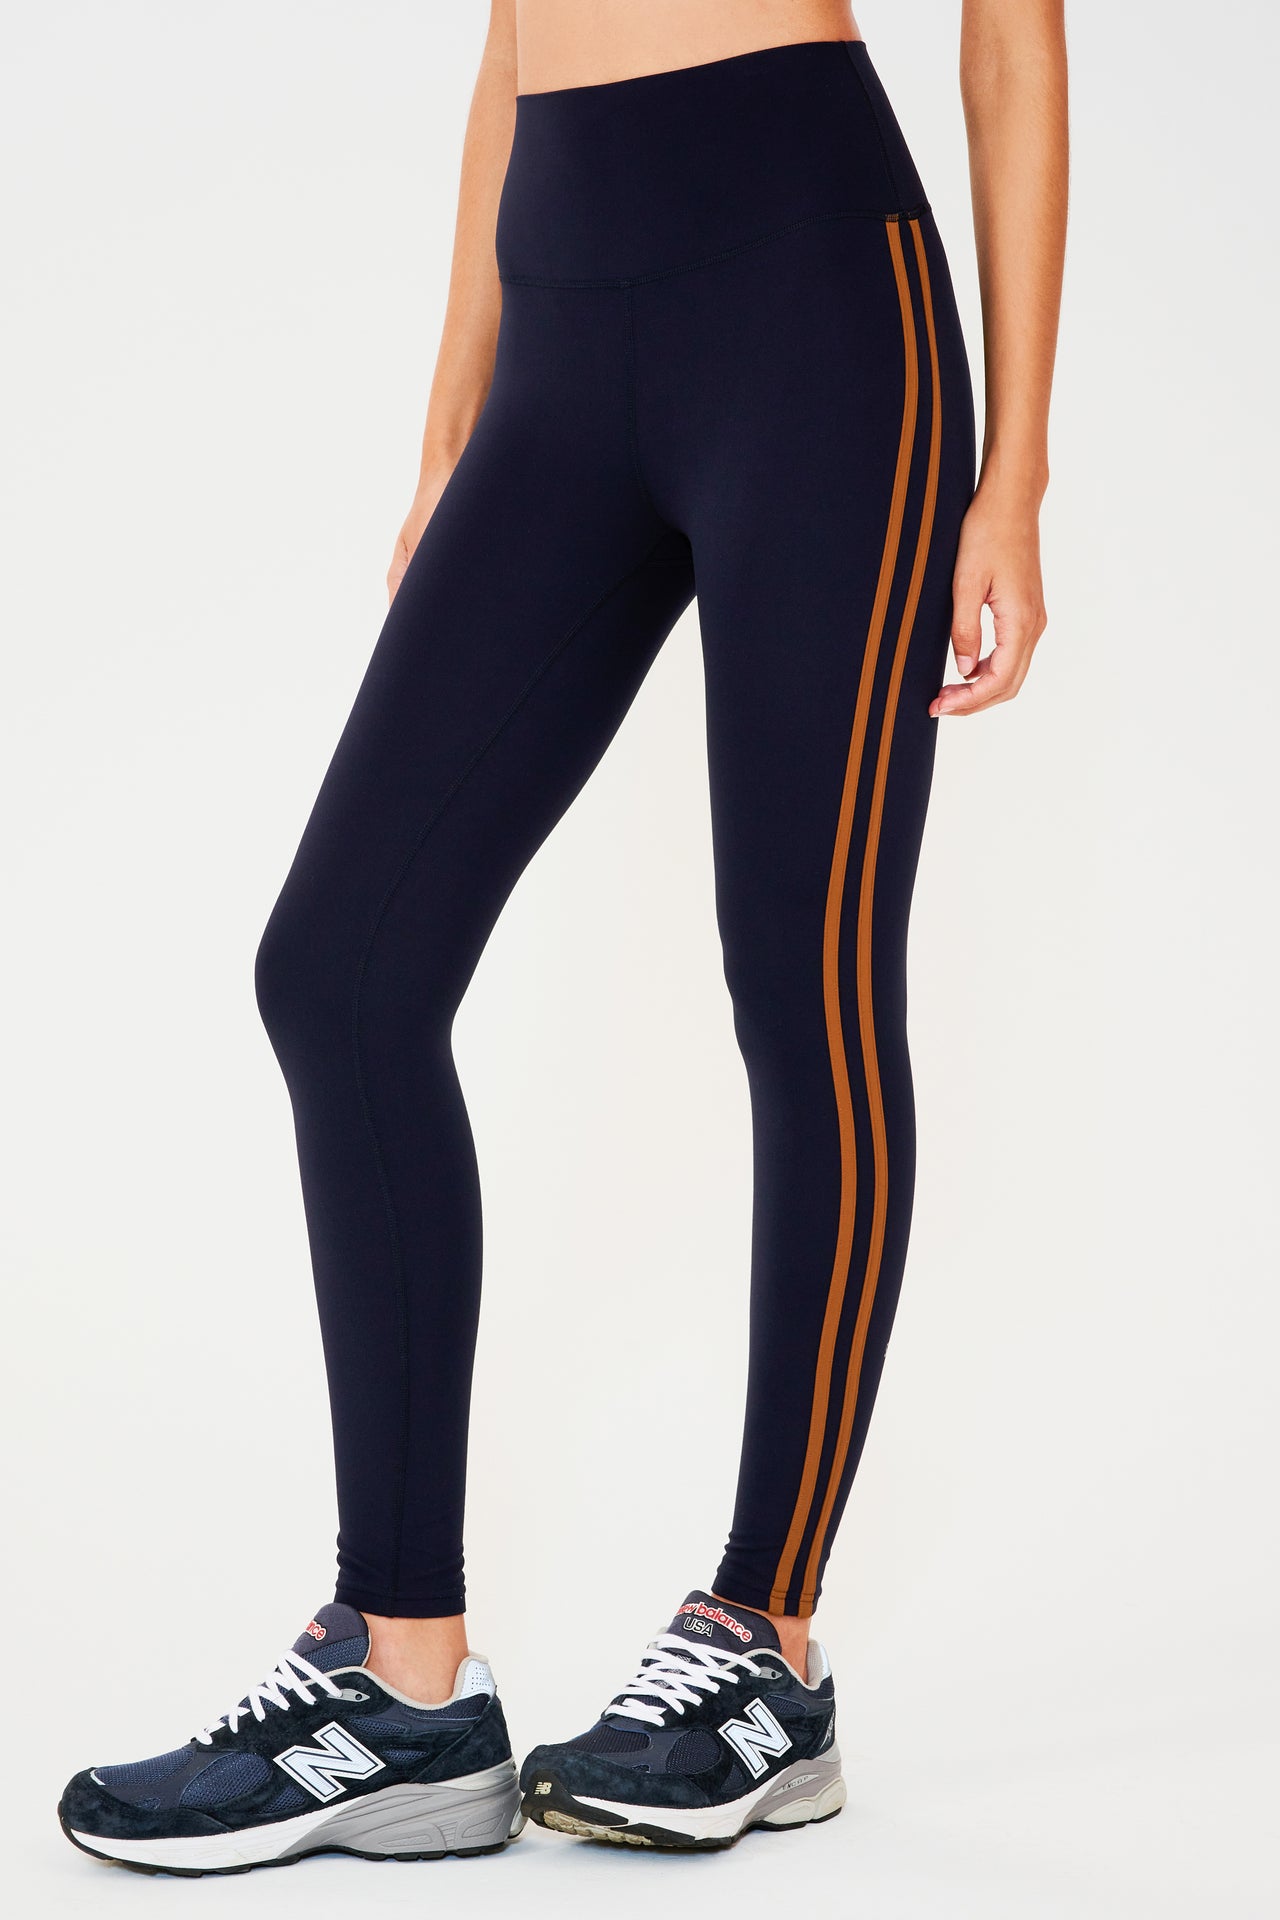 Front view of girl wearing dark blue leggings with two thin brown stripes down the side with dark blue shoes